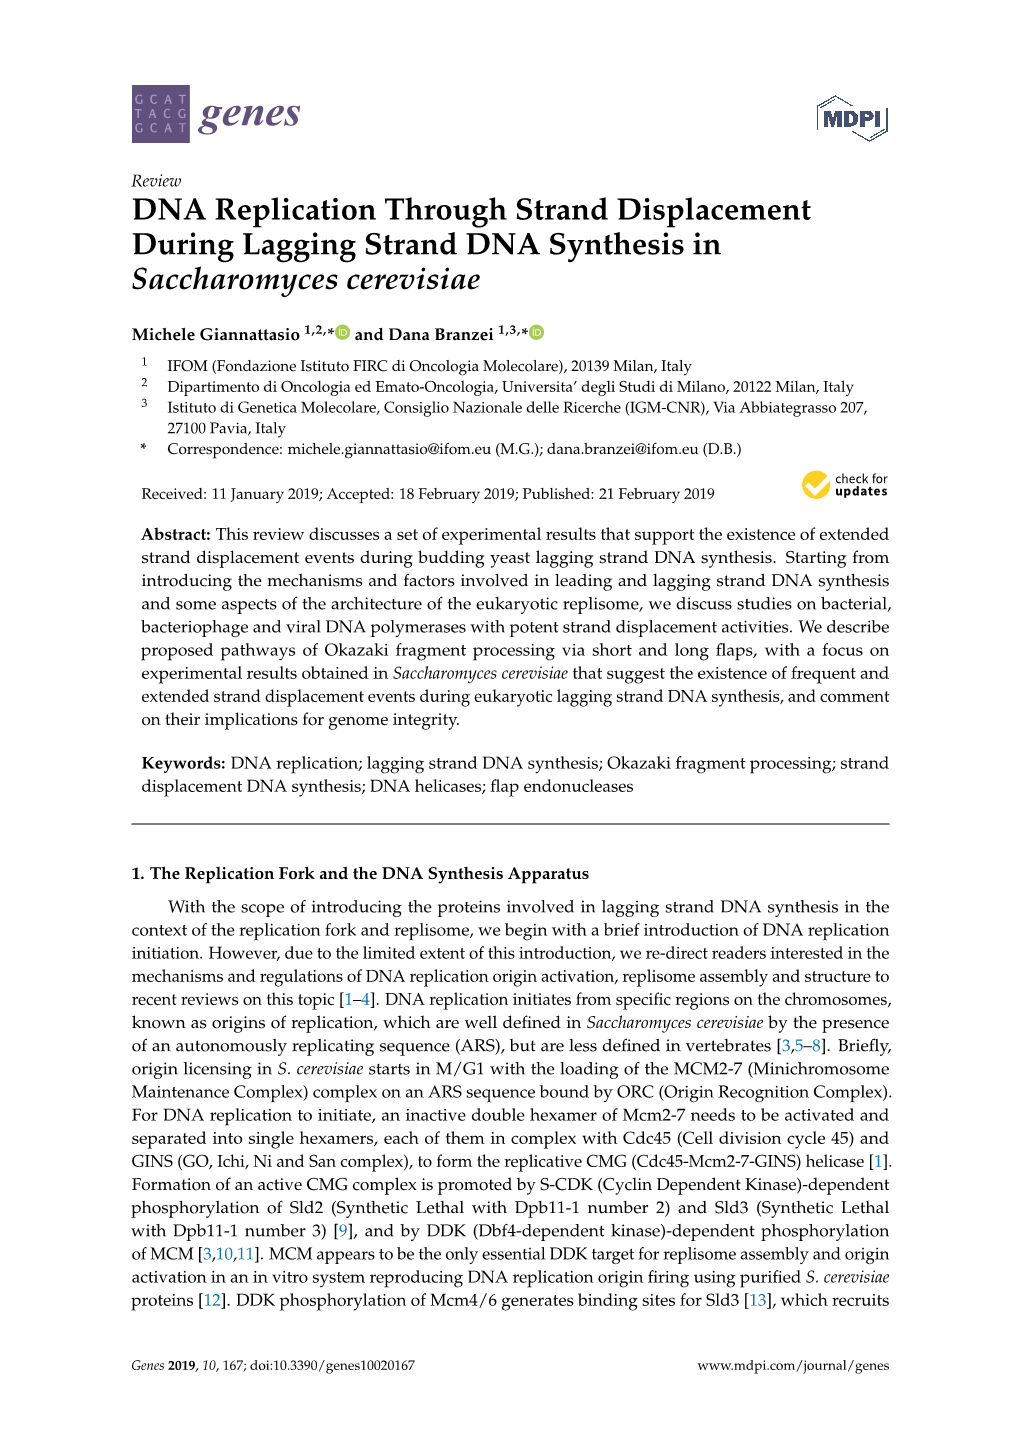 DNA Replication Through Strand Displacement During Lagging Strand DNA Synthesis in Saccharomyces Cerevisiae